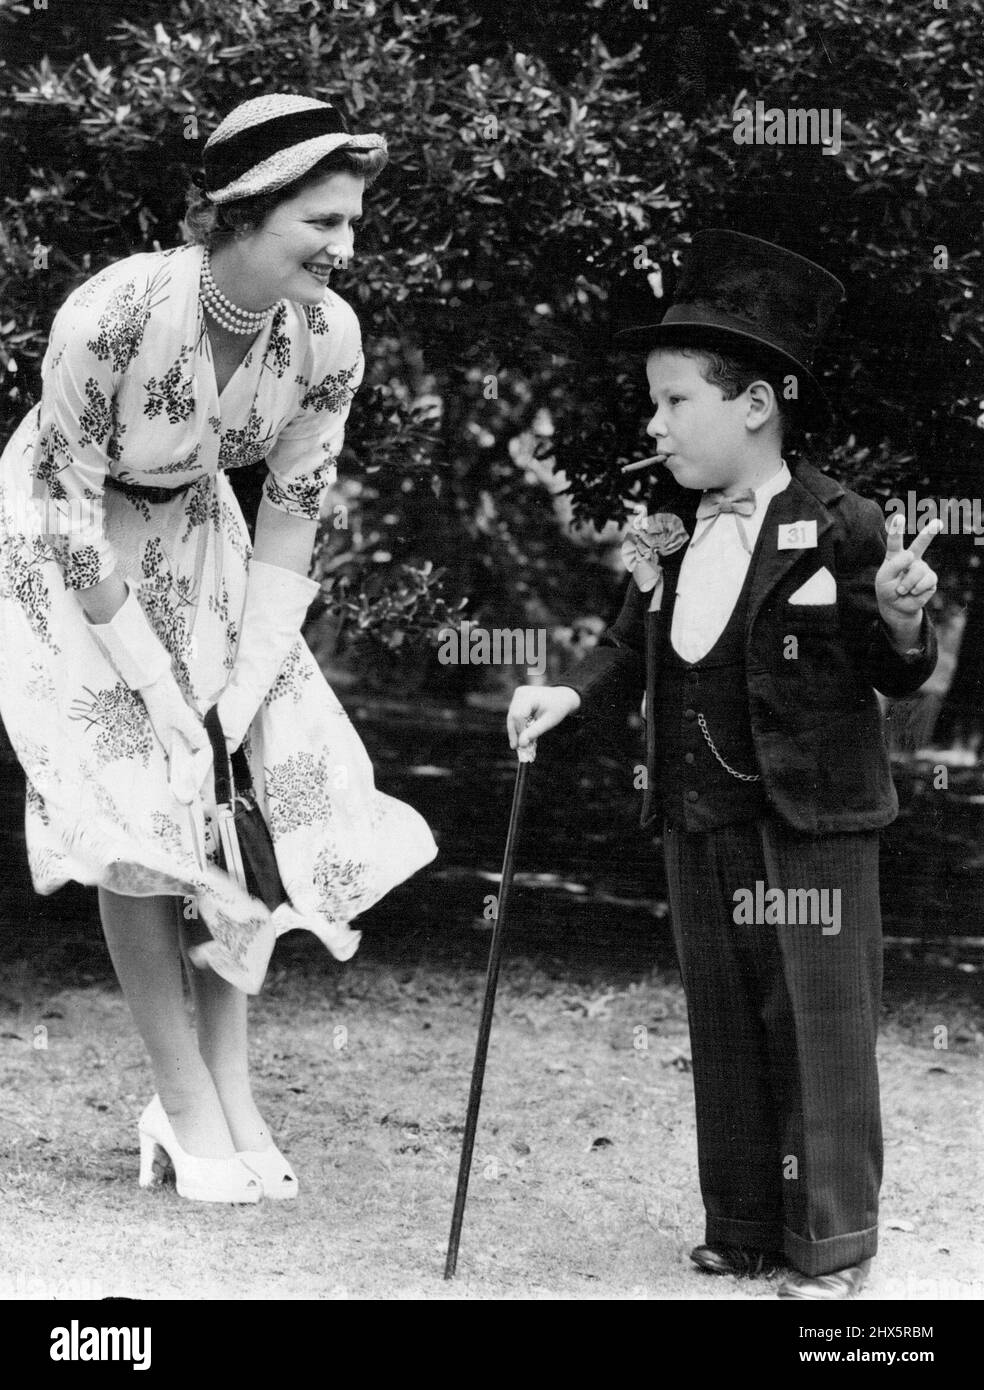 Young Adrian Wilmshurst stopped the show with his impersonation of Sir Winston Churchill at the Hastings and Rye Conservatives' garden fete at St. Leonards today. Smiling at Adrian is Mrs. Christopher Soames, the Prime Minister's daughter, who oped the fete. August 8, 1953. (Photo by Daily Mail Contract Pictures). Stock Photo